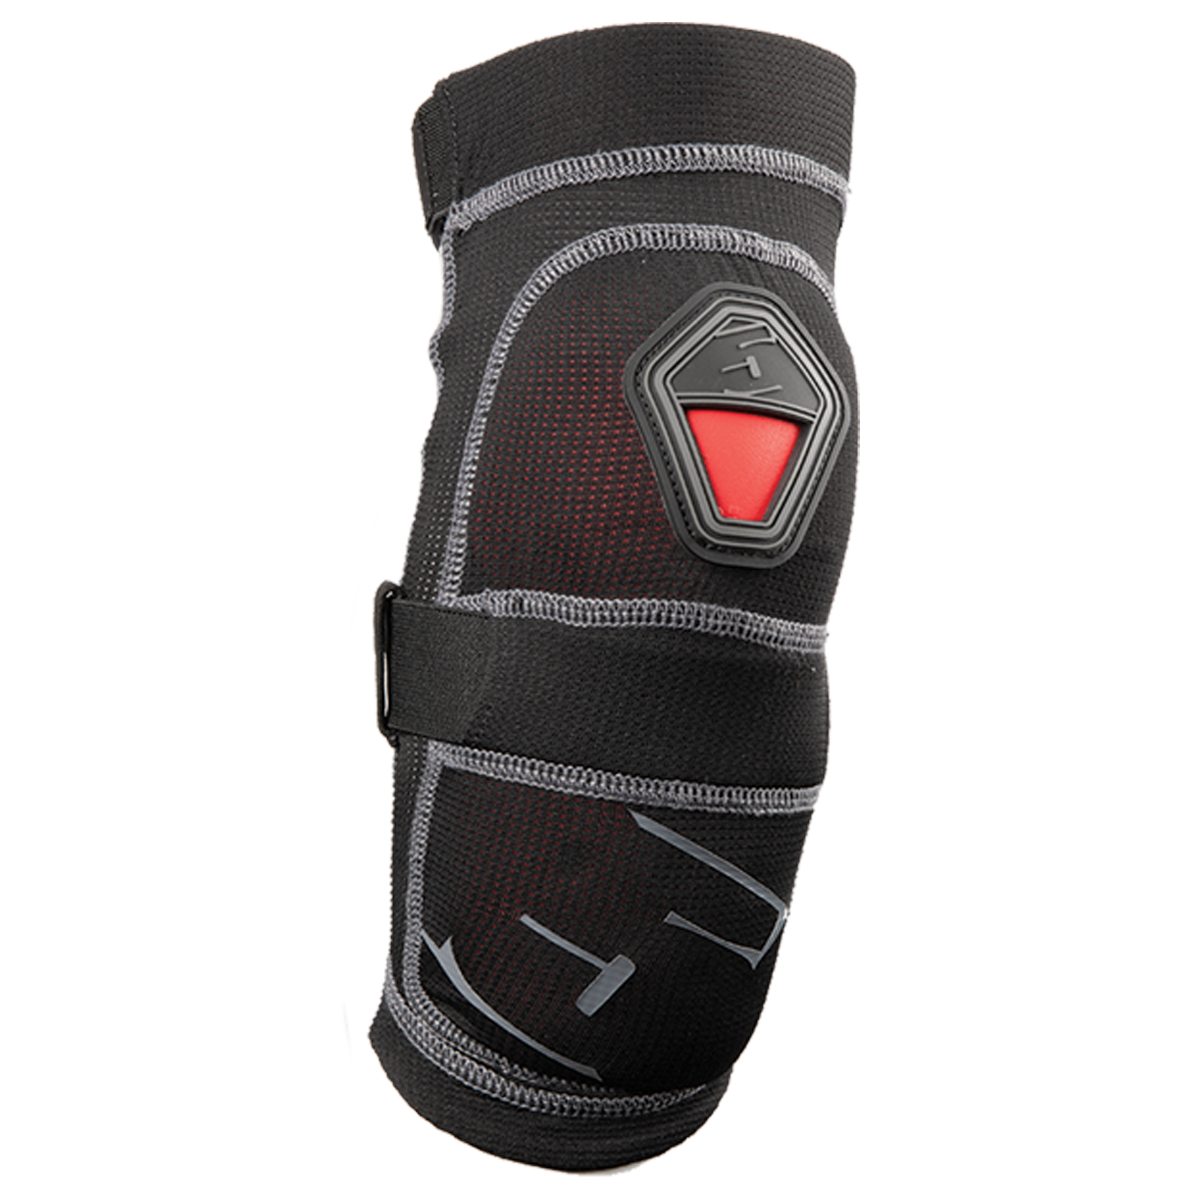  adult r mor elbow pad